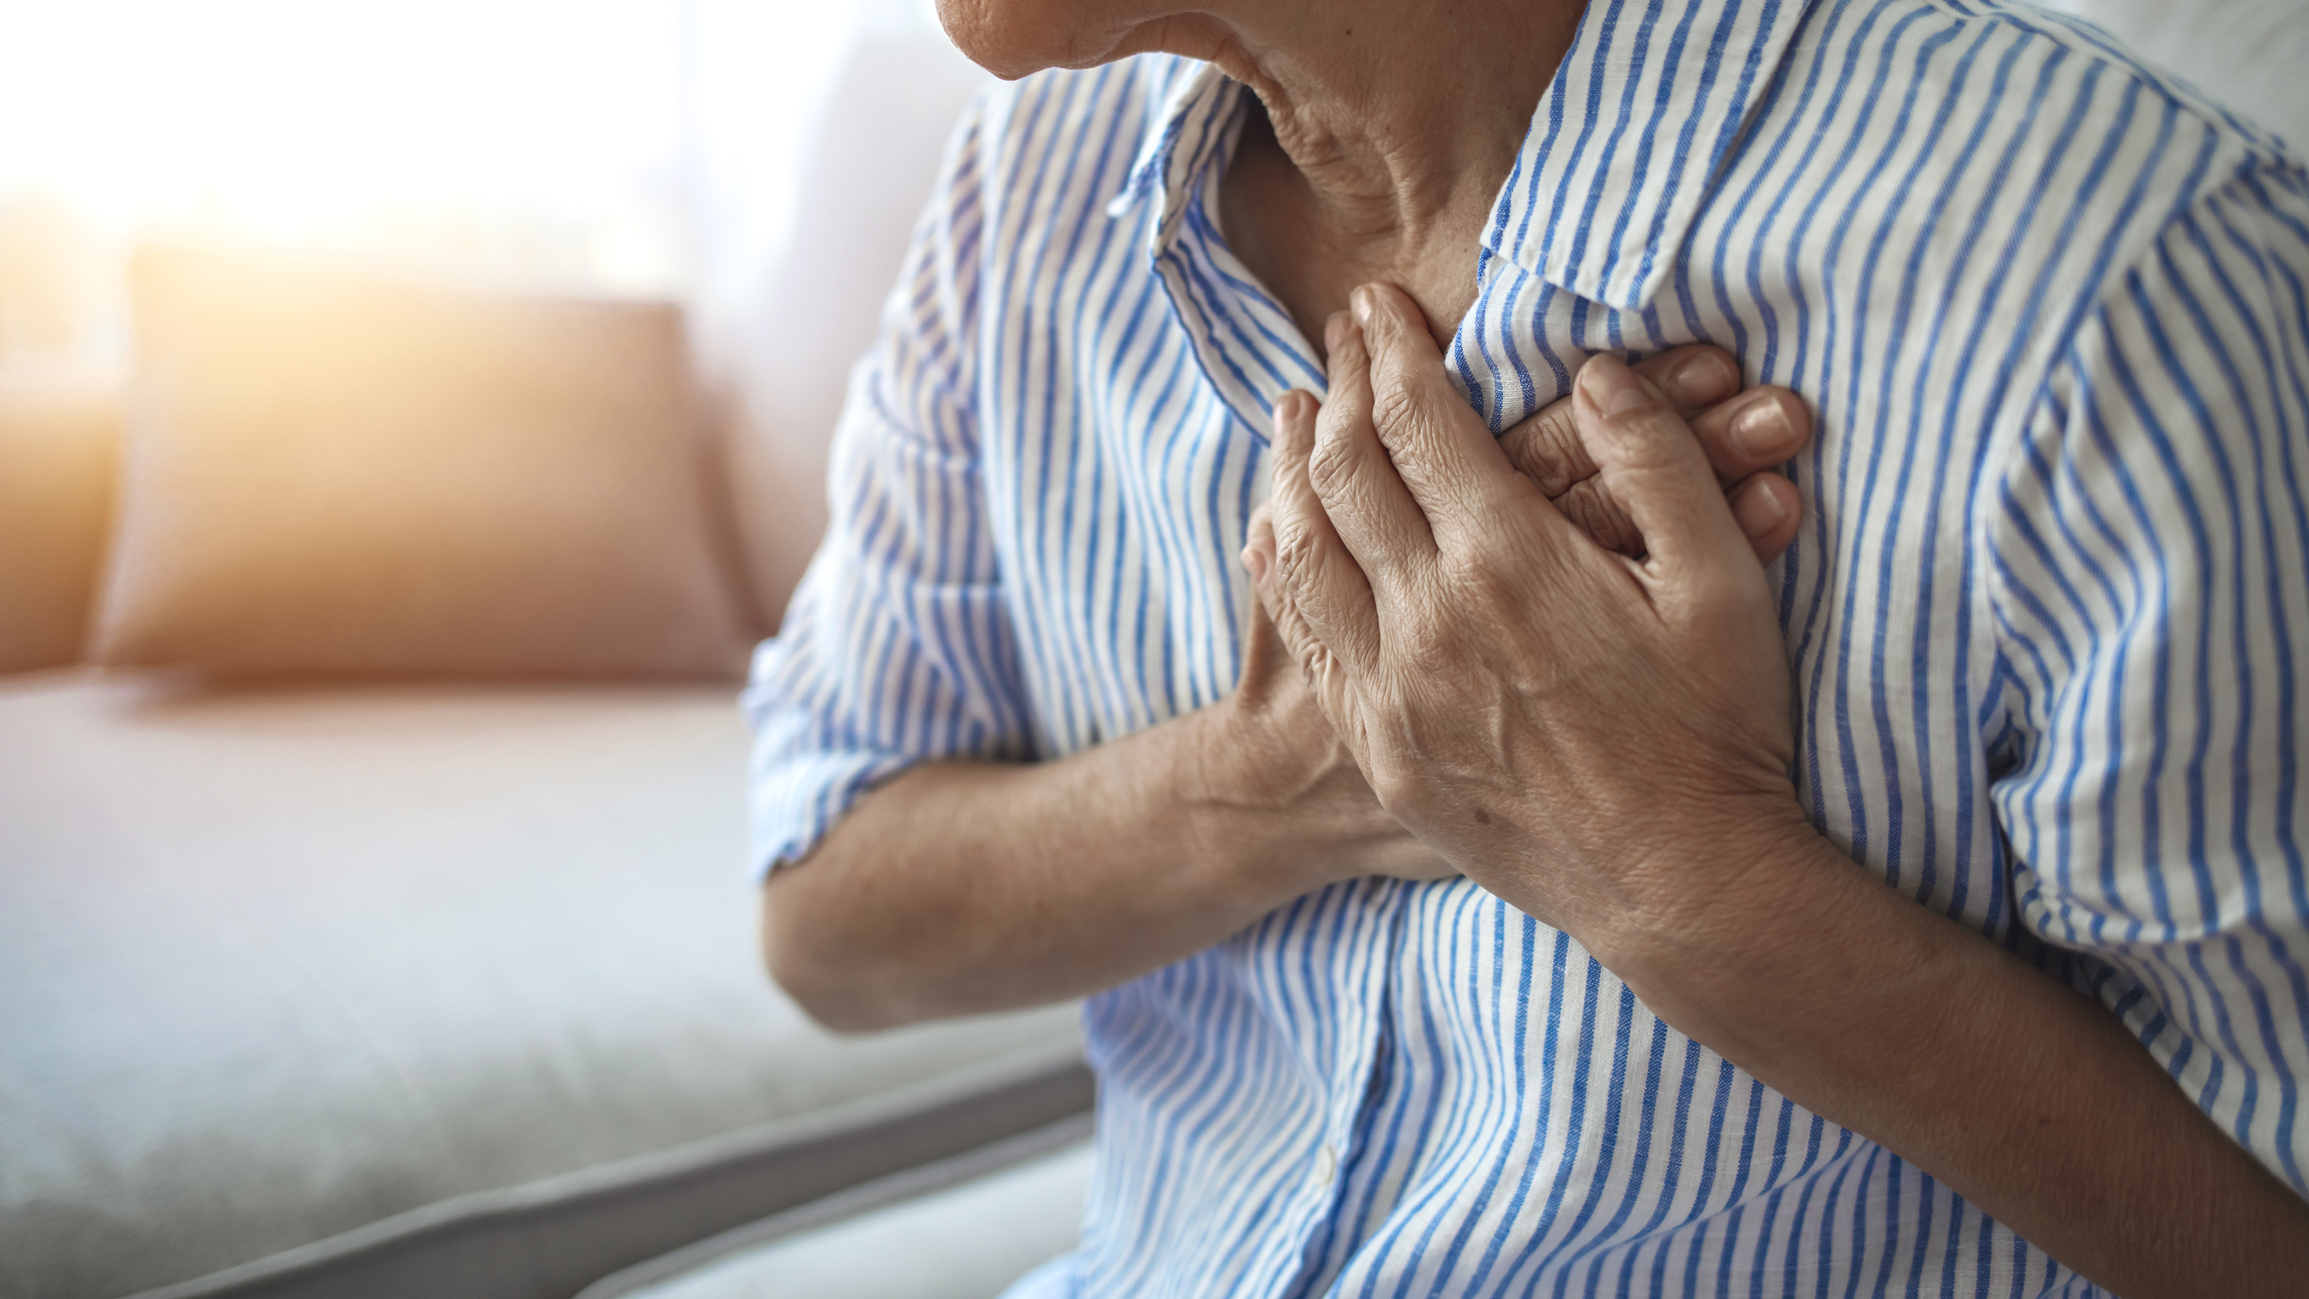 A woman holds her chest to indicate chest pain